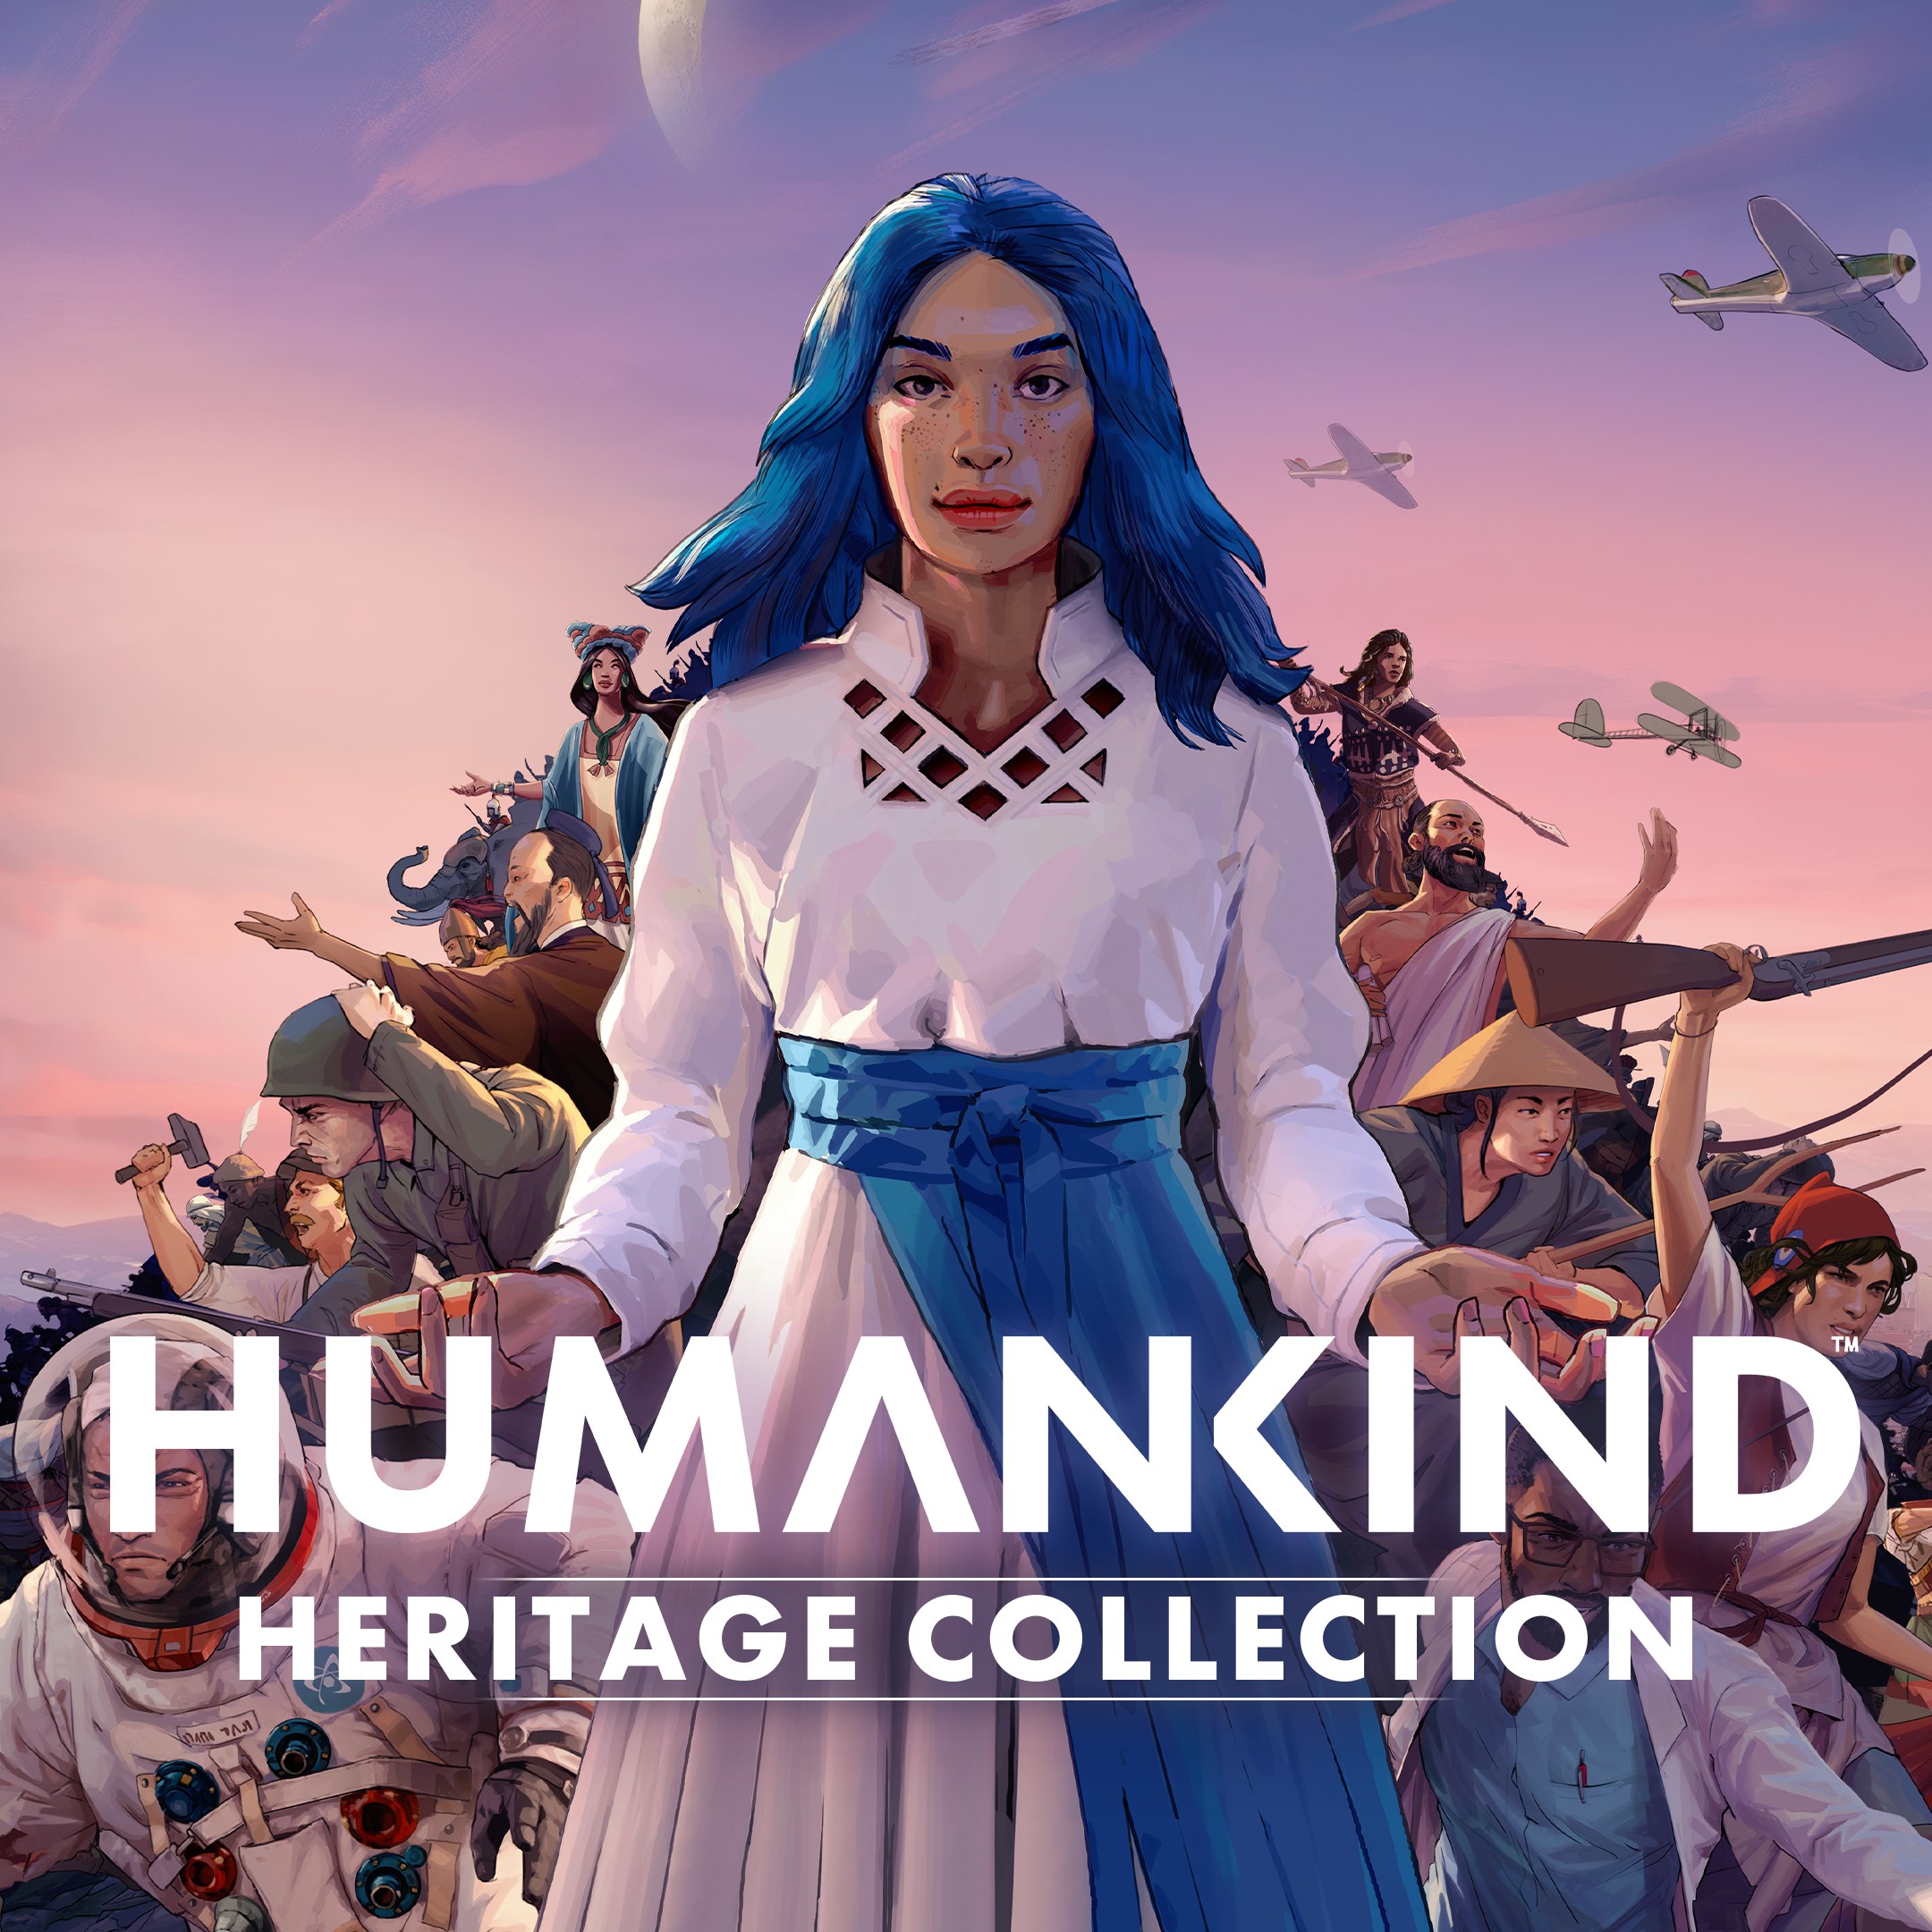 HUMANKIND Heritage Collection technical specifications for computer